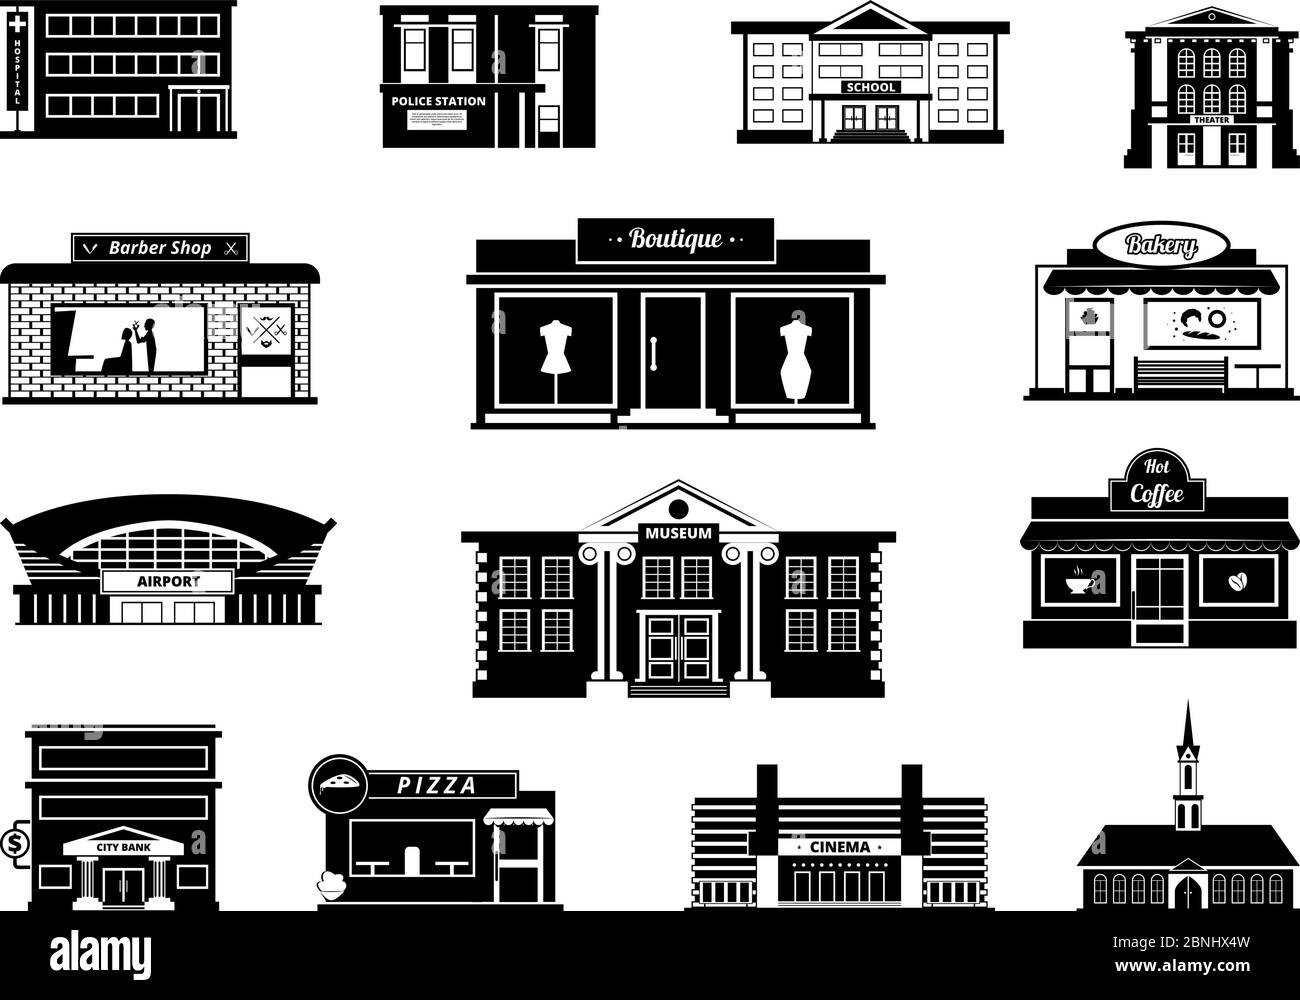 Shops, markets and others municipal buildings. Monochrome urban vector illustrations Stock Vector